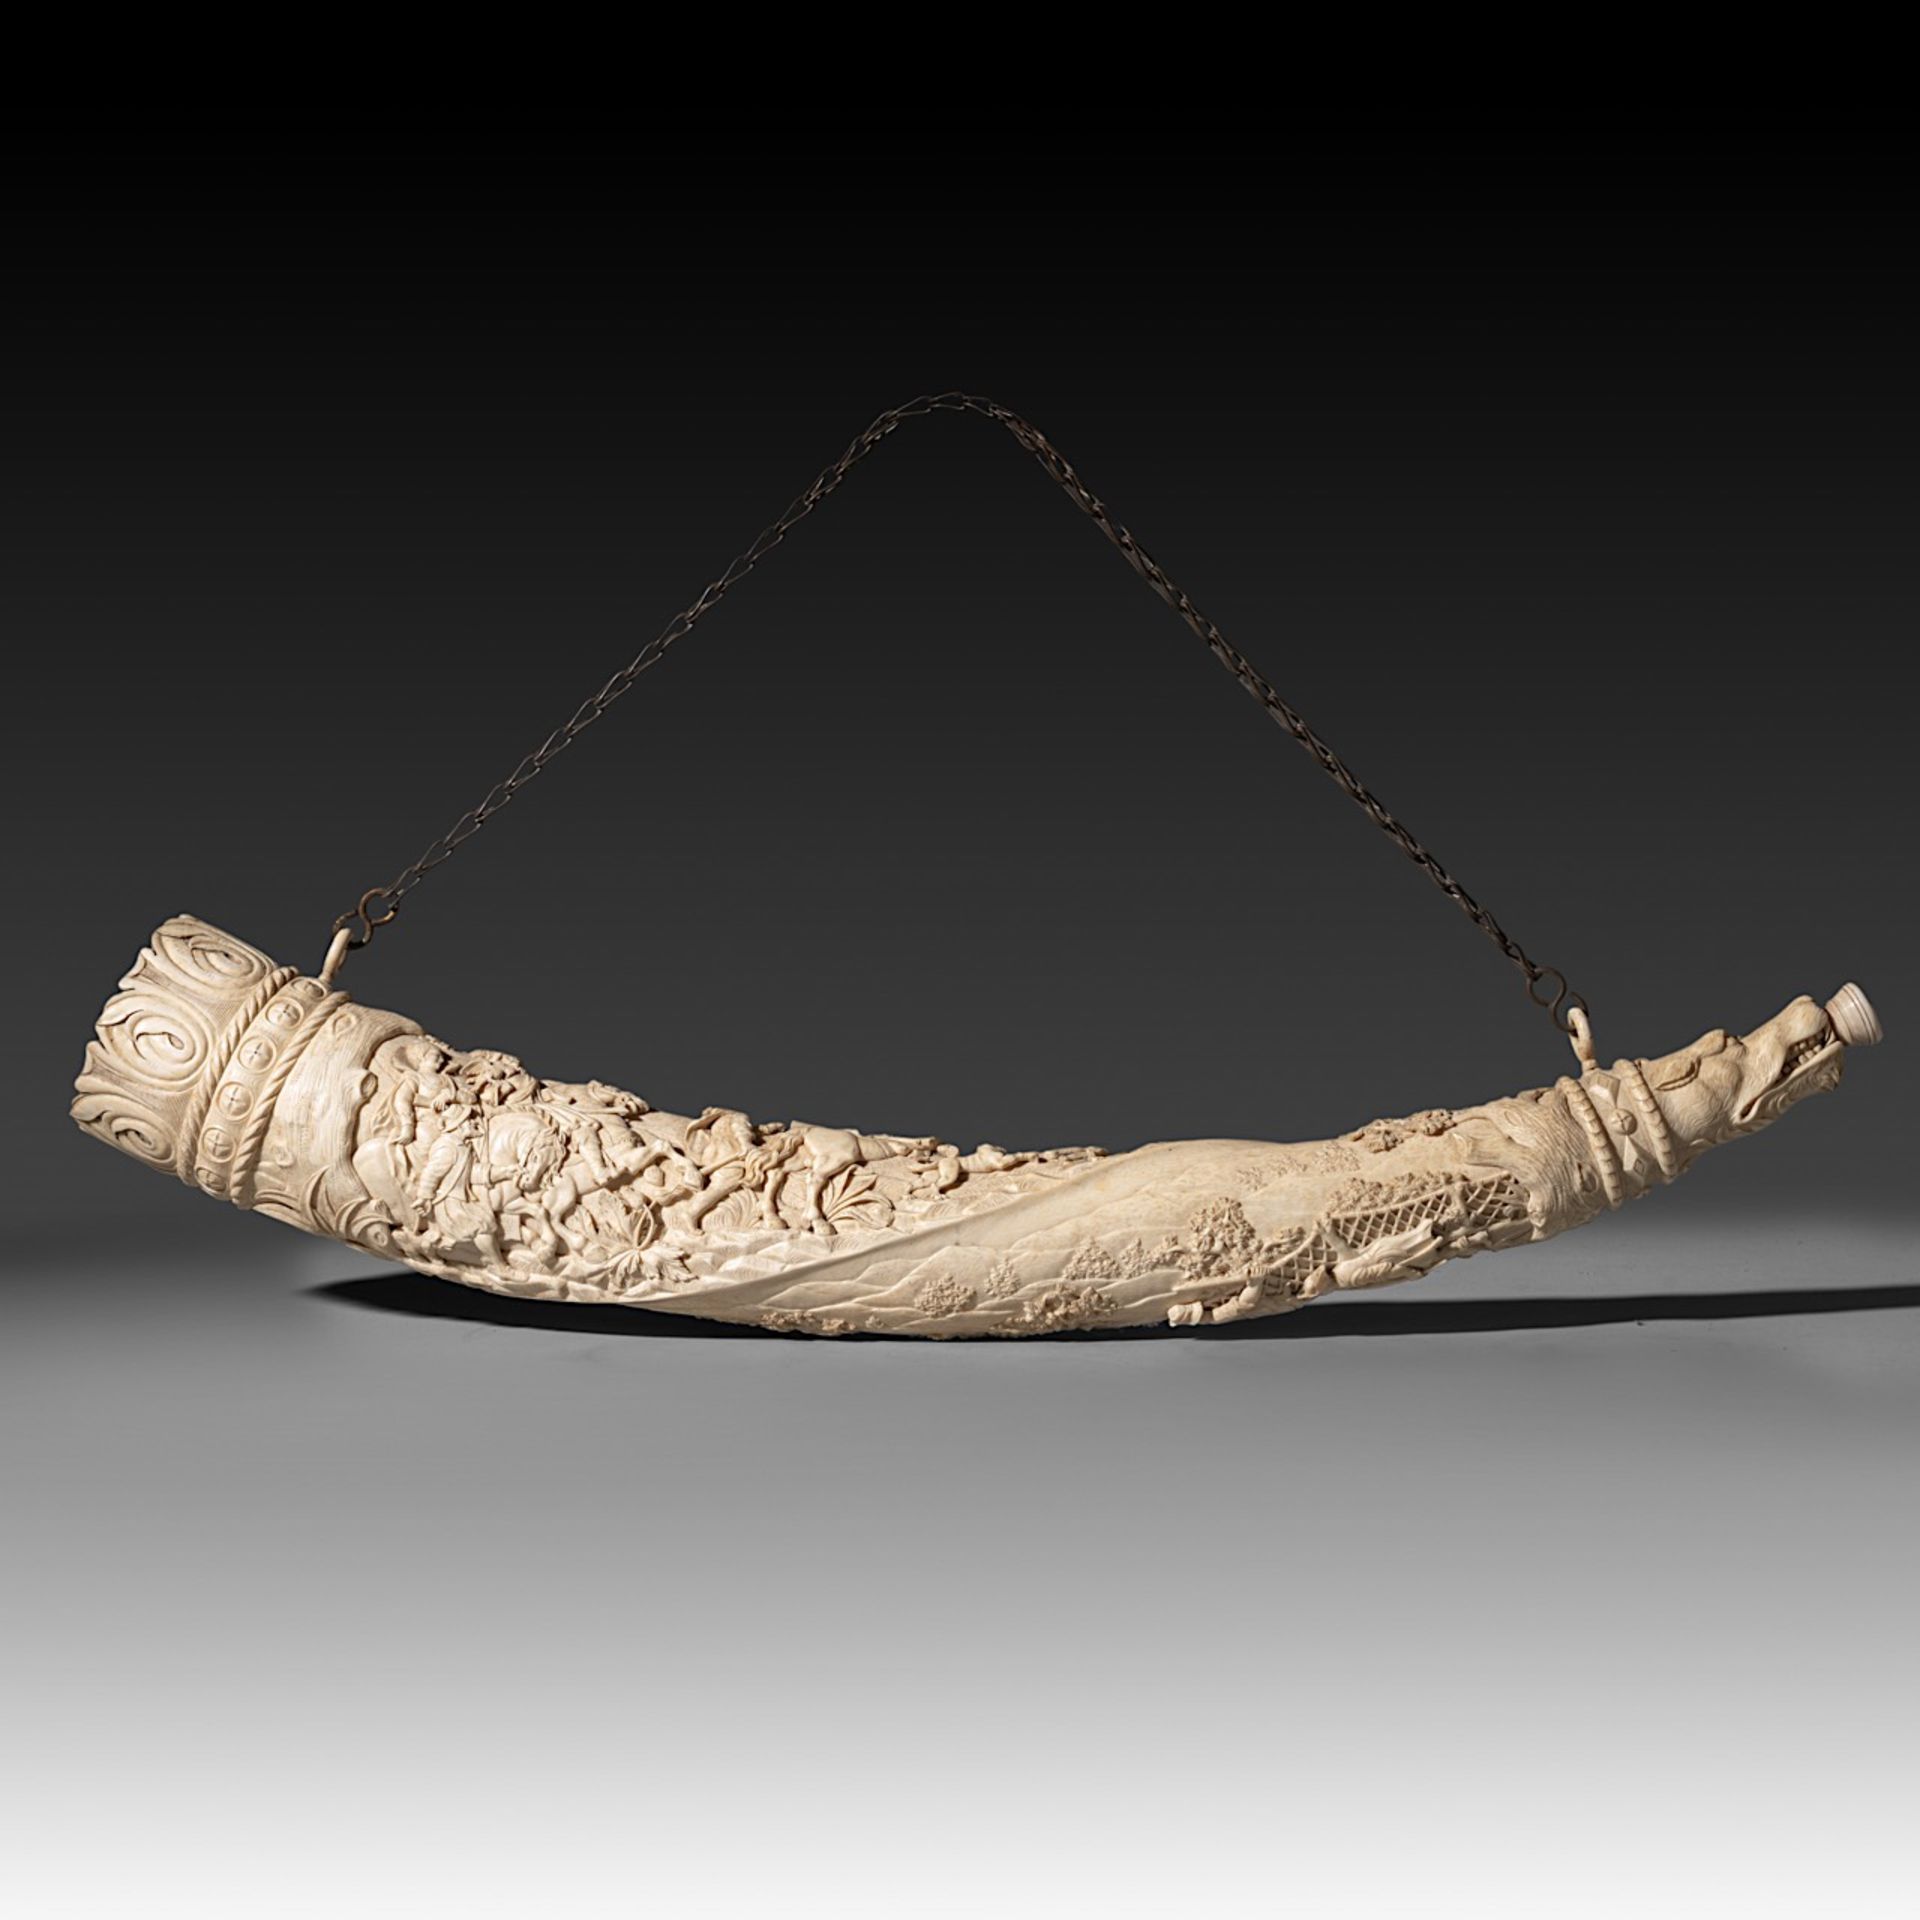 A 19th-century ivory hunting horn, last quarter 19th century, W 74,5 cm - 2850 g (+) - Image 3 of 11